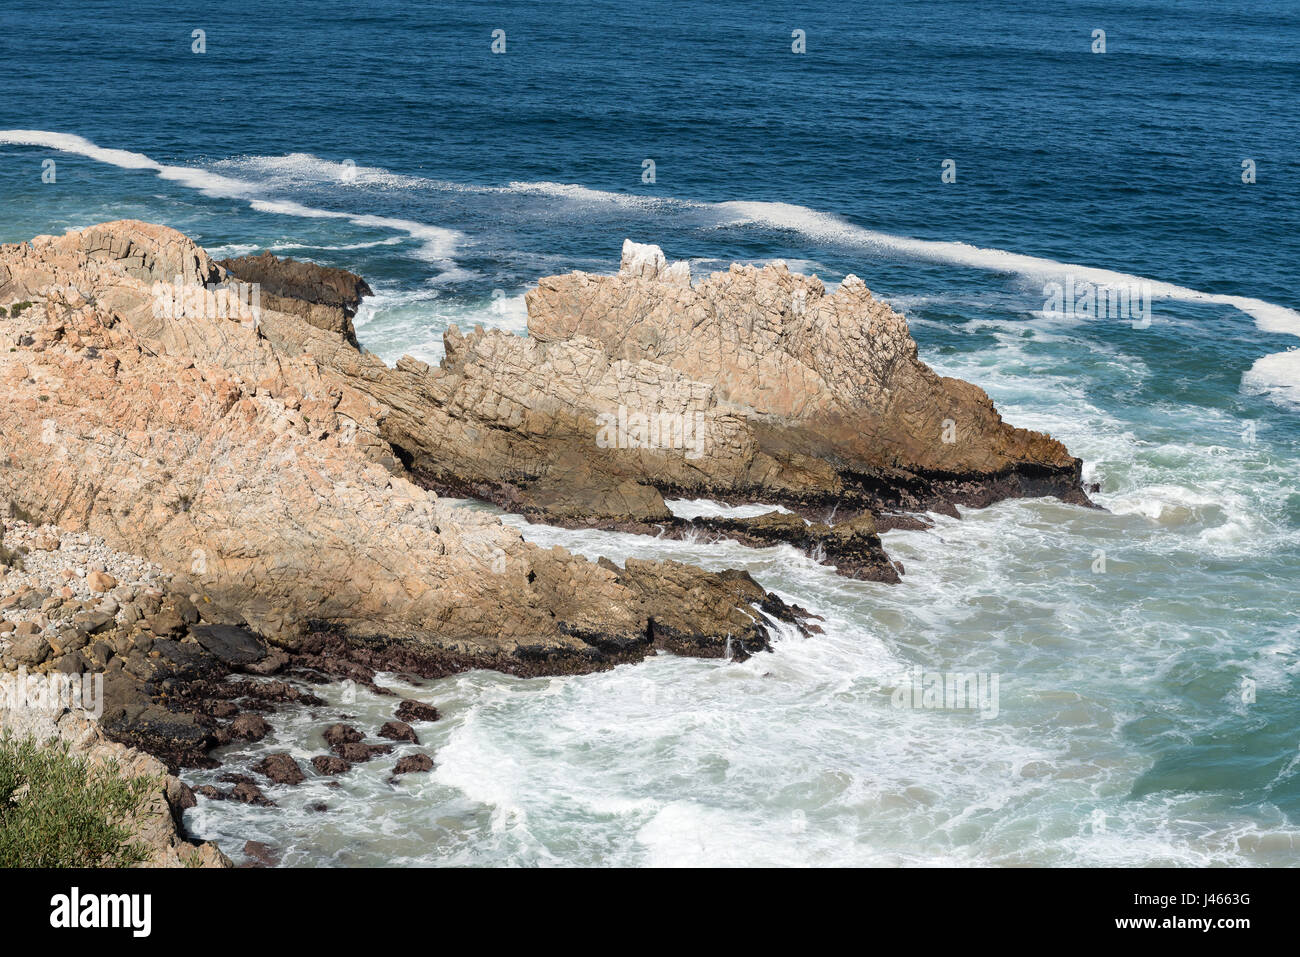 A rocky outcrop, resembling a dragon, in the sea next to Clarence Drive between Gordons Bay and Rooi-Els Stock Photo